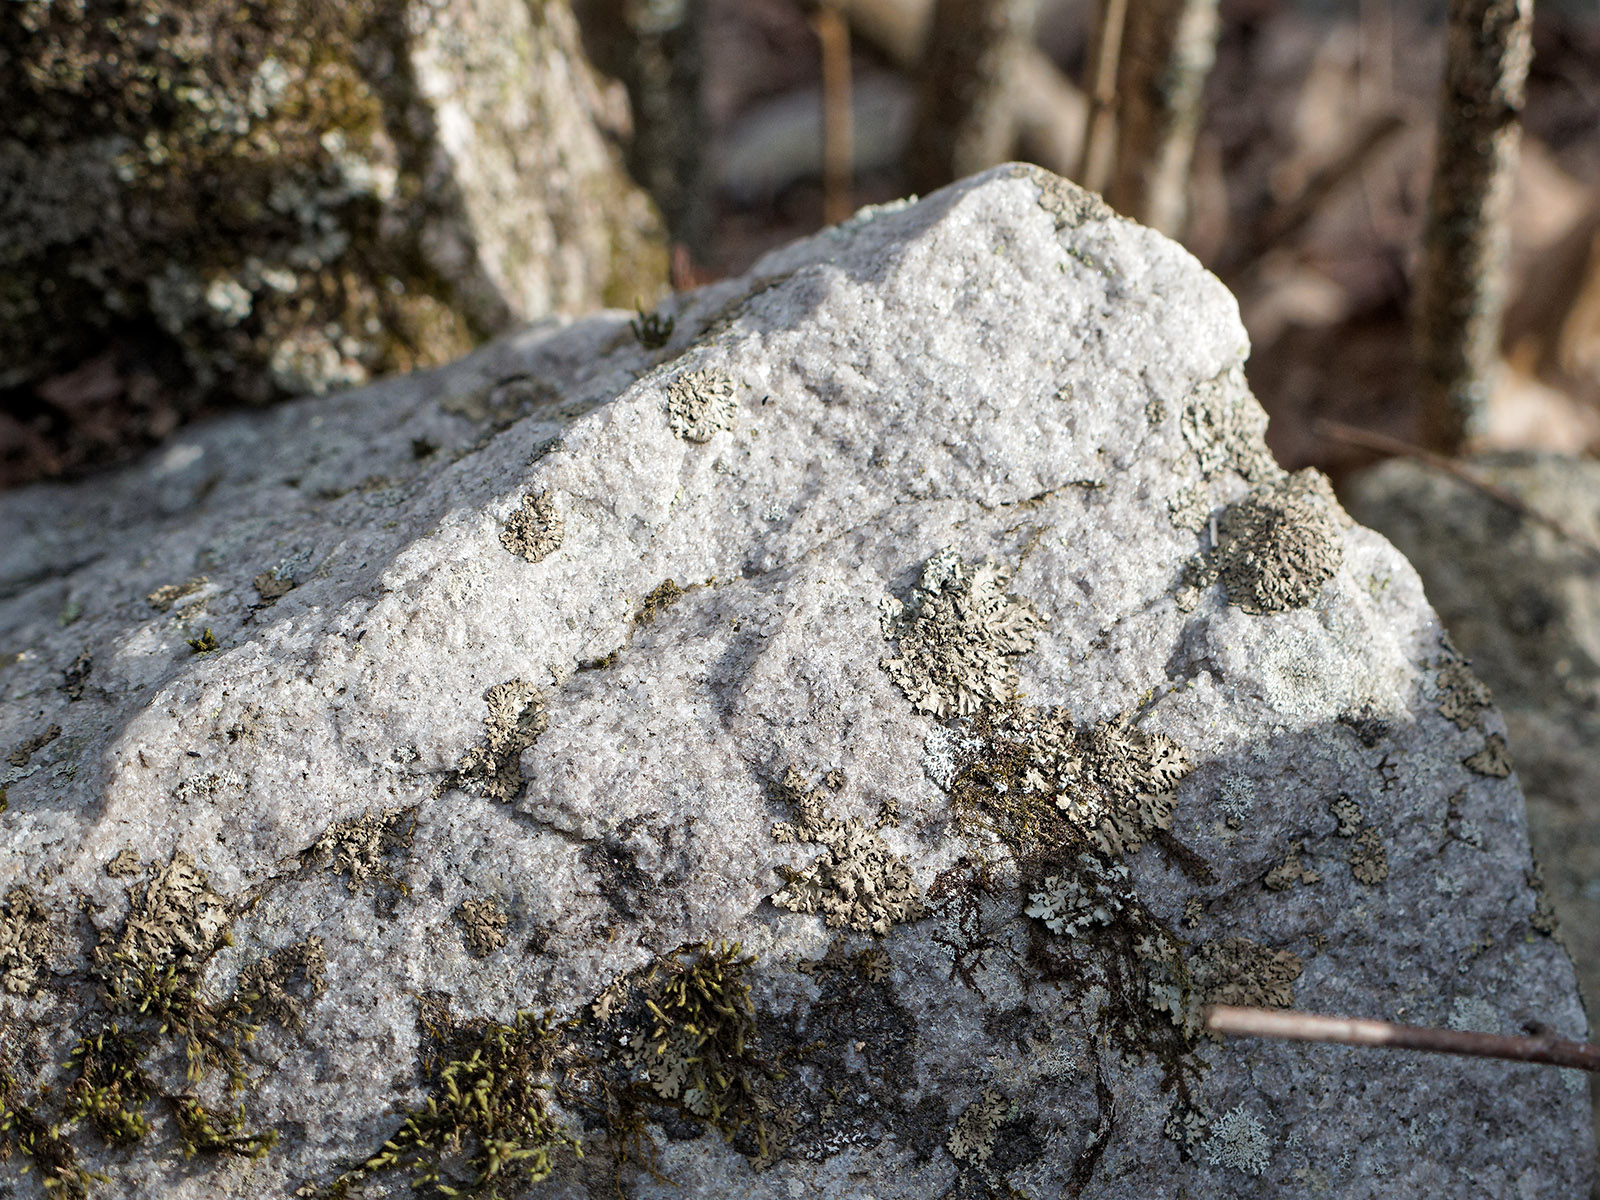 Swift run quartzite rock covered by lichen on the starting trail at the Bearfence Mountain Park area.